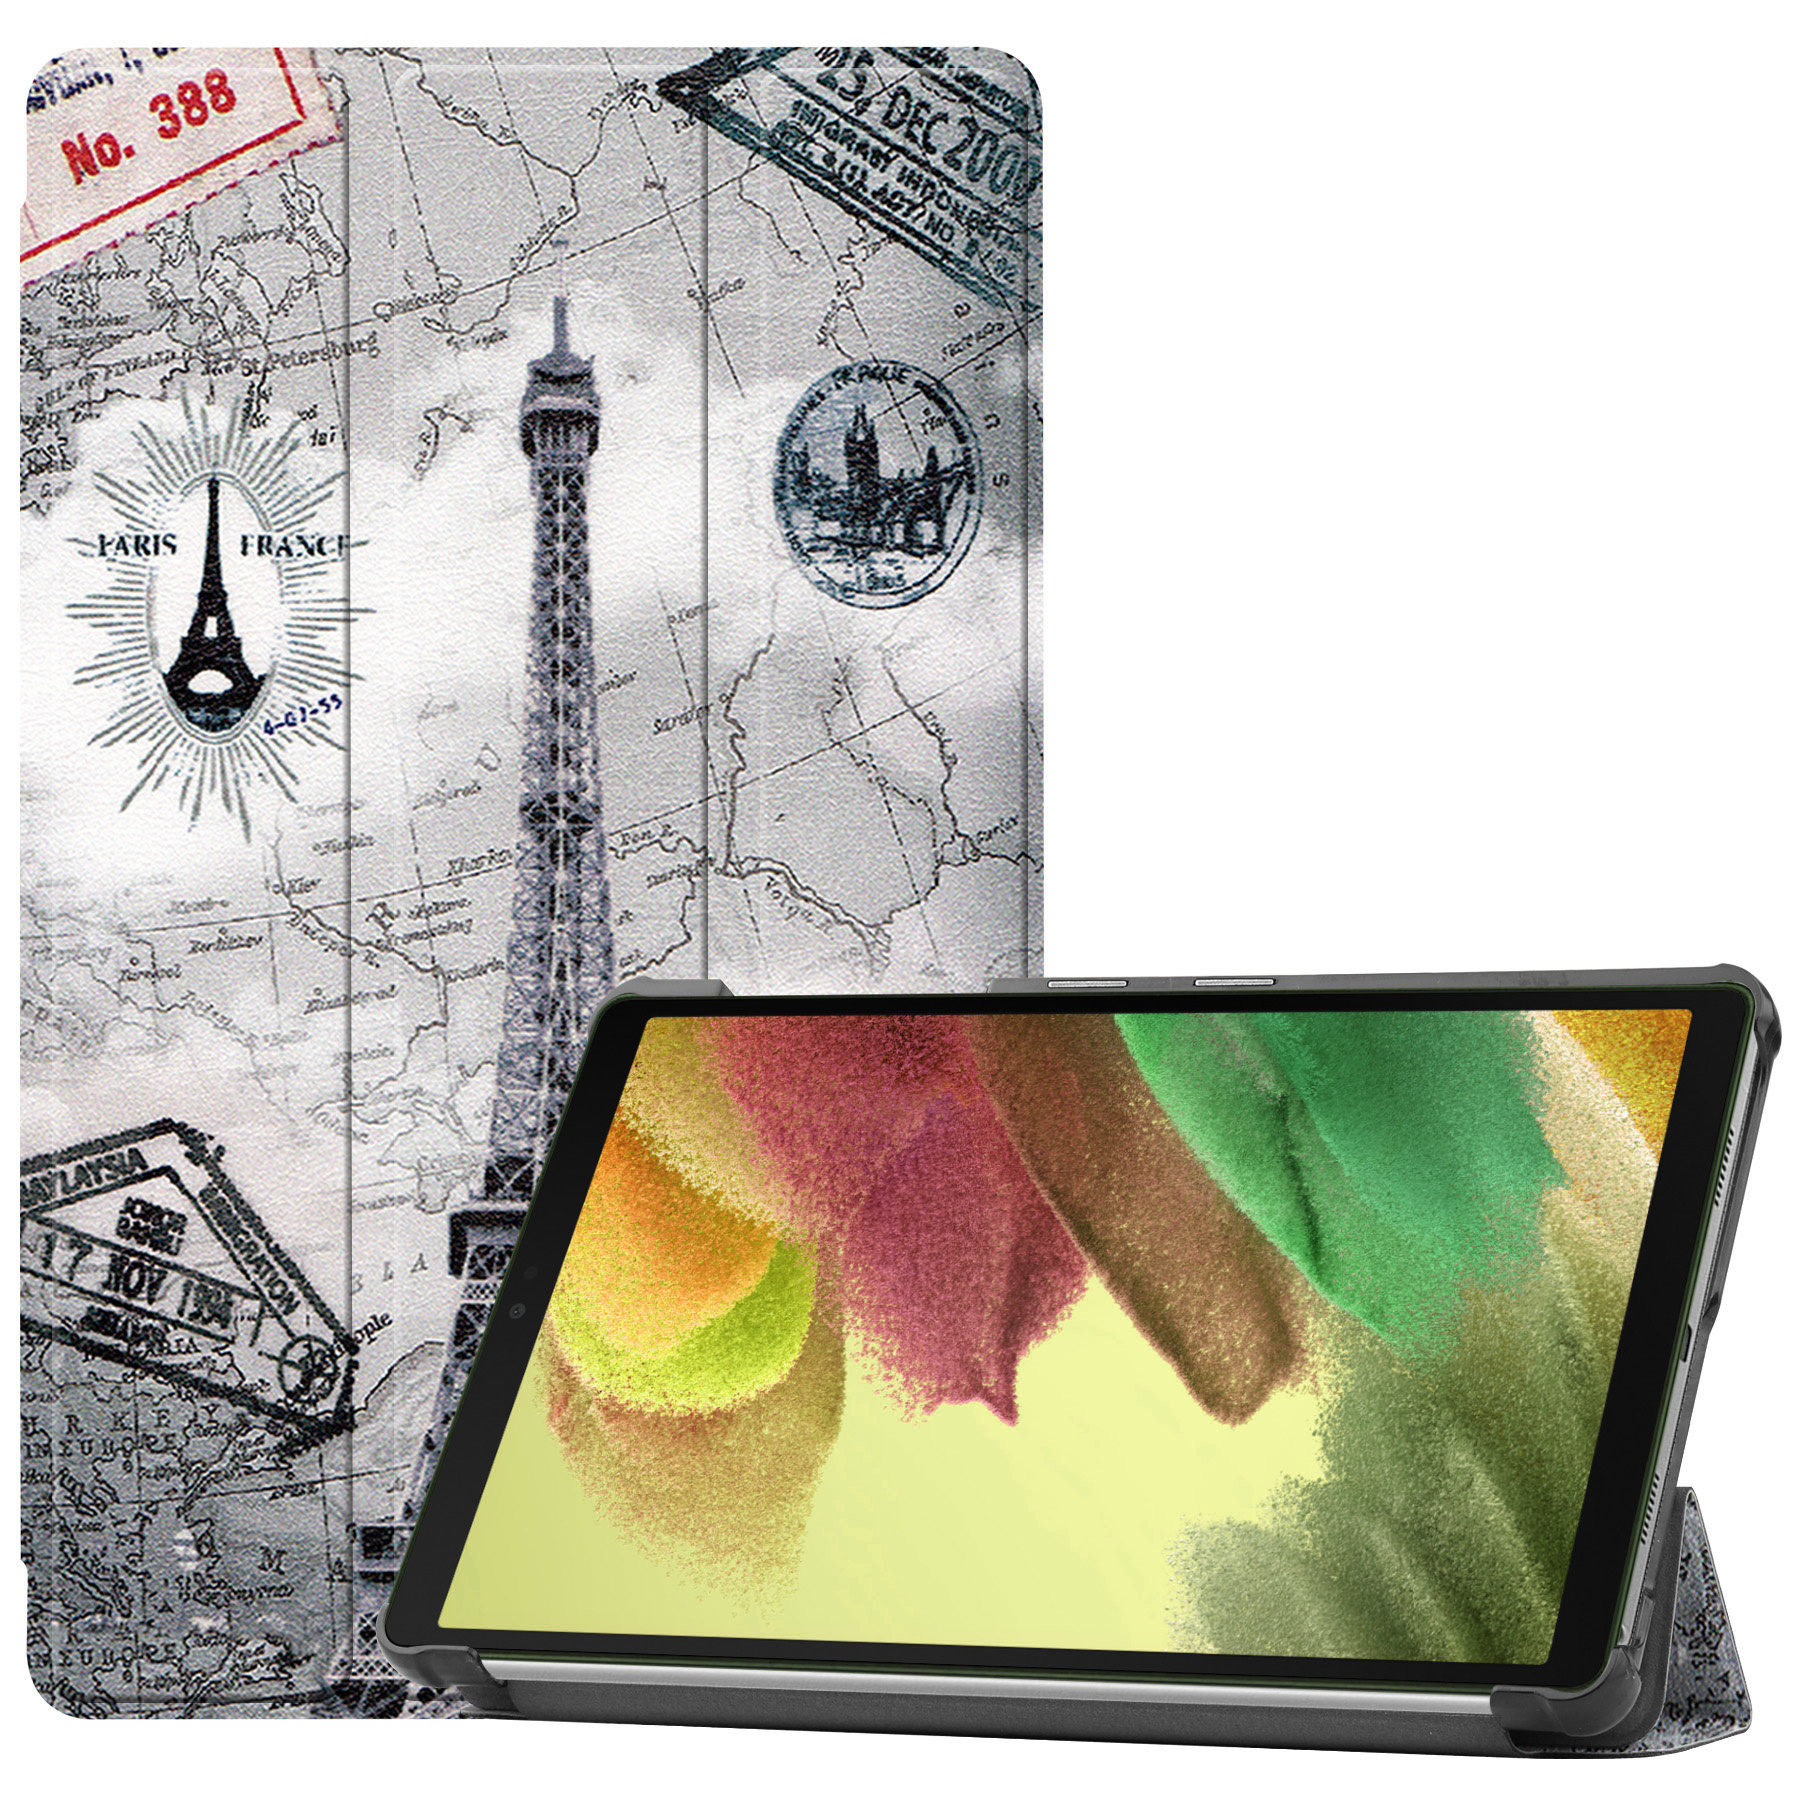 Nomfy Samsung Tab S6 Lite Hoesje Book Case Hoes - Samsung Galaxy Tab S6 Lite Hoes Hardcover Hoesje - Eiffeltoren